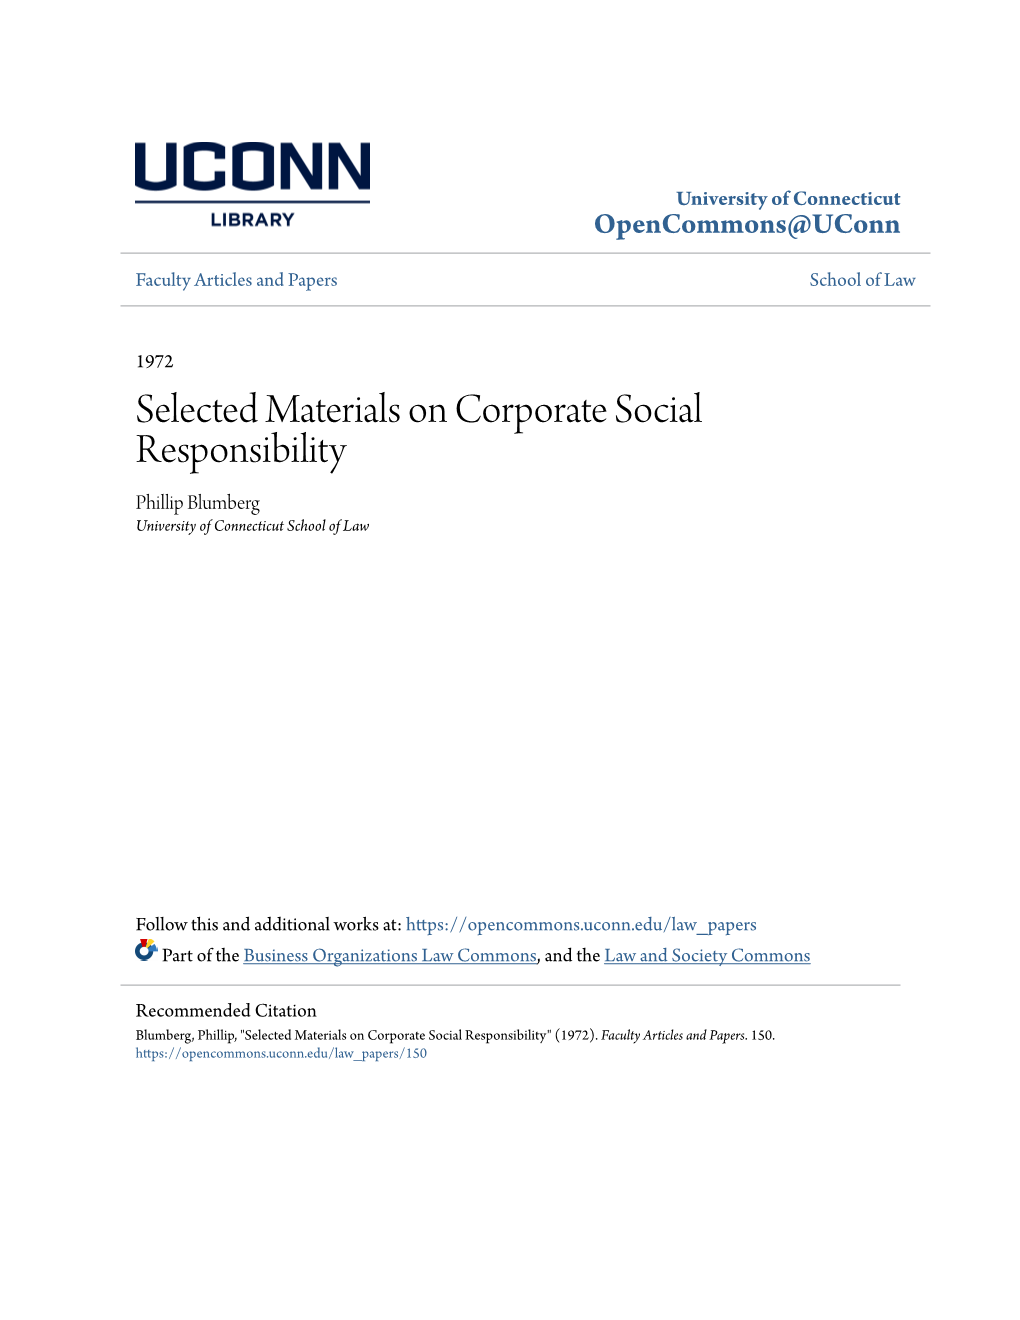 Selected Materials on Corporate Social Responsibility Phillip Blumberg University of Connecticut School of Law